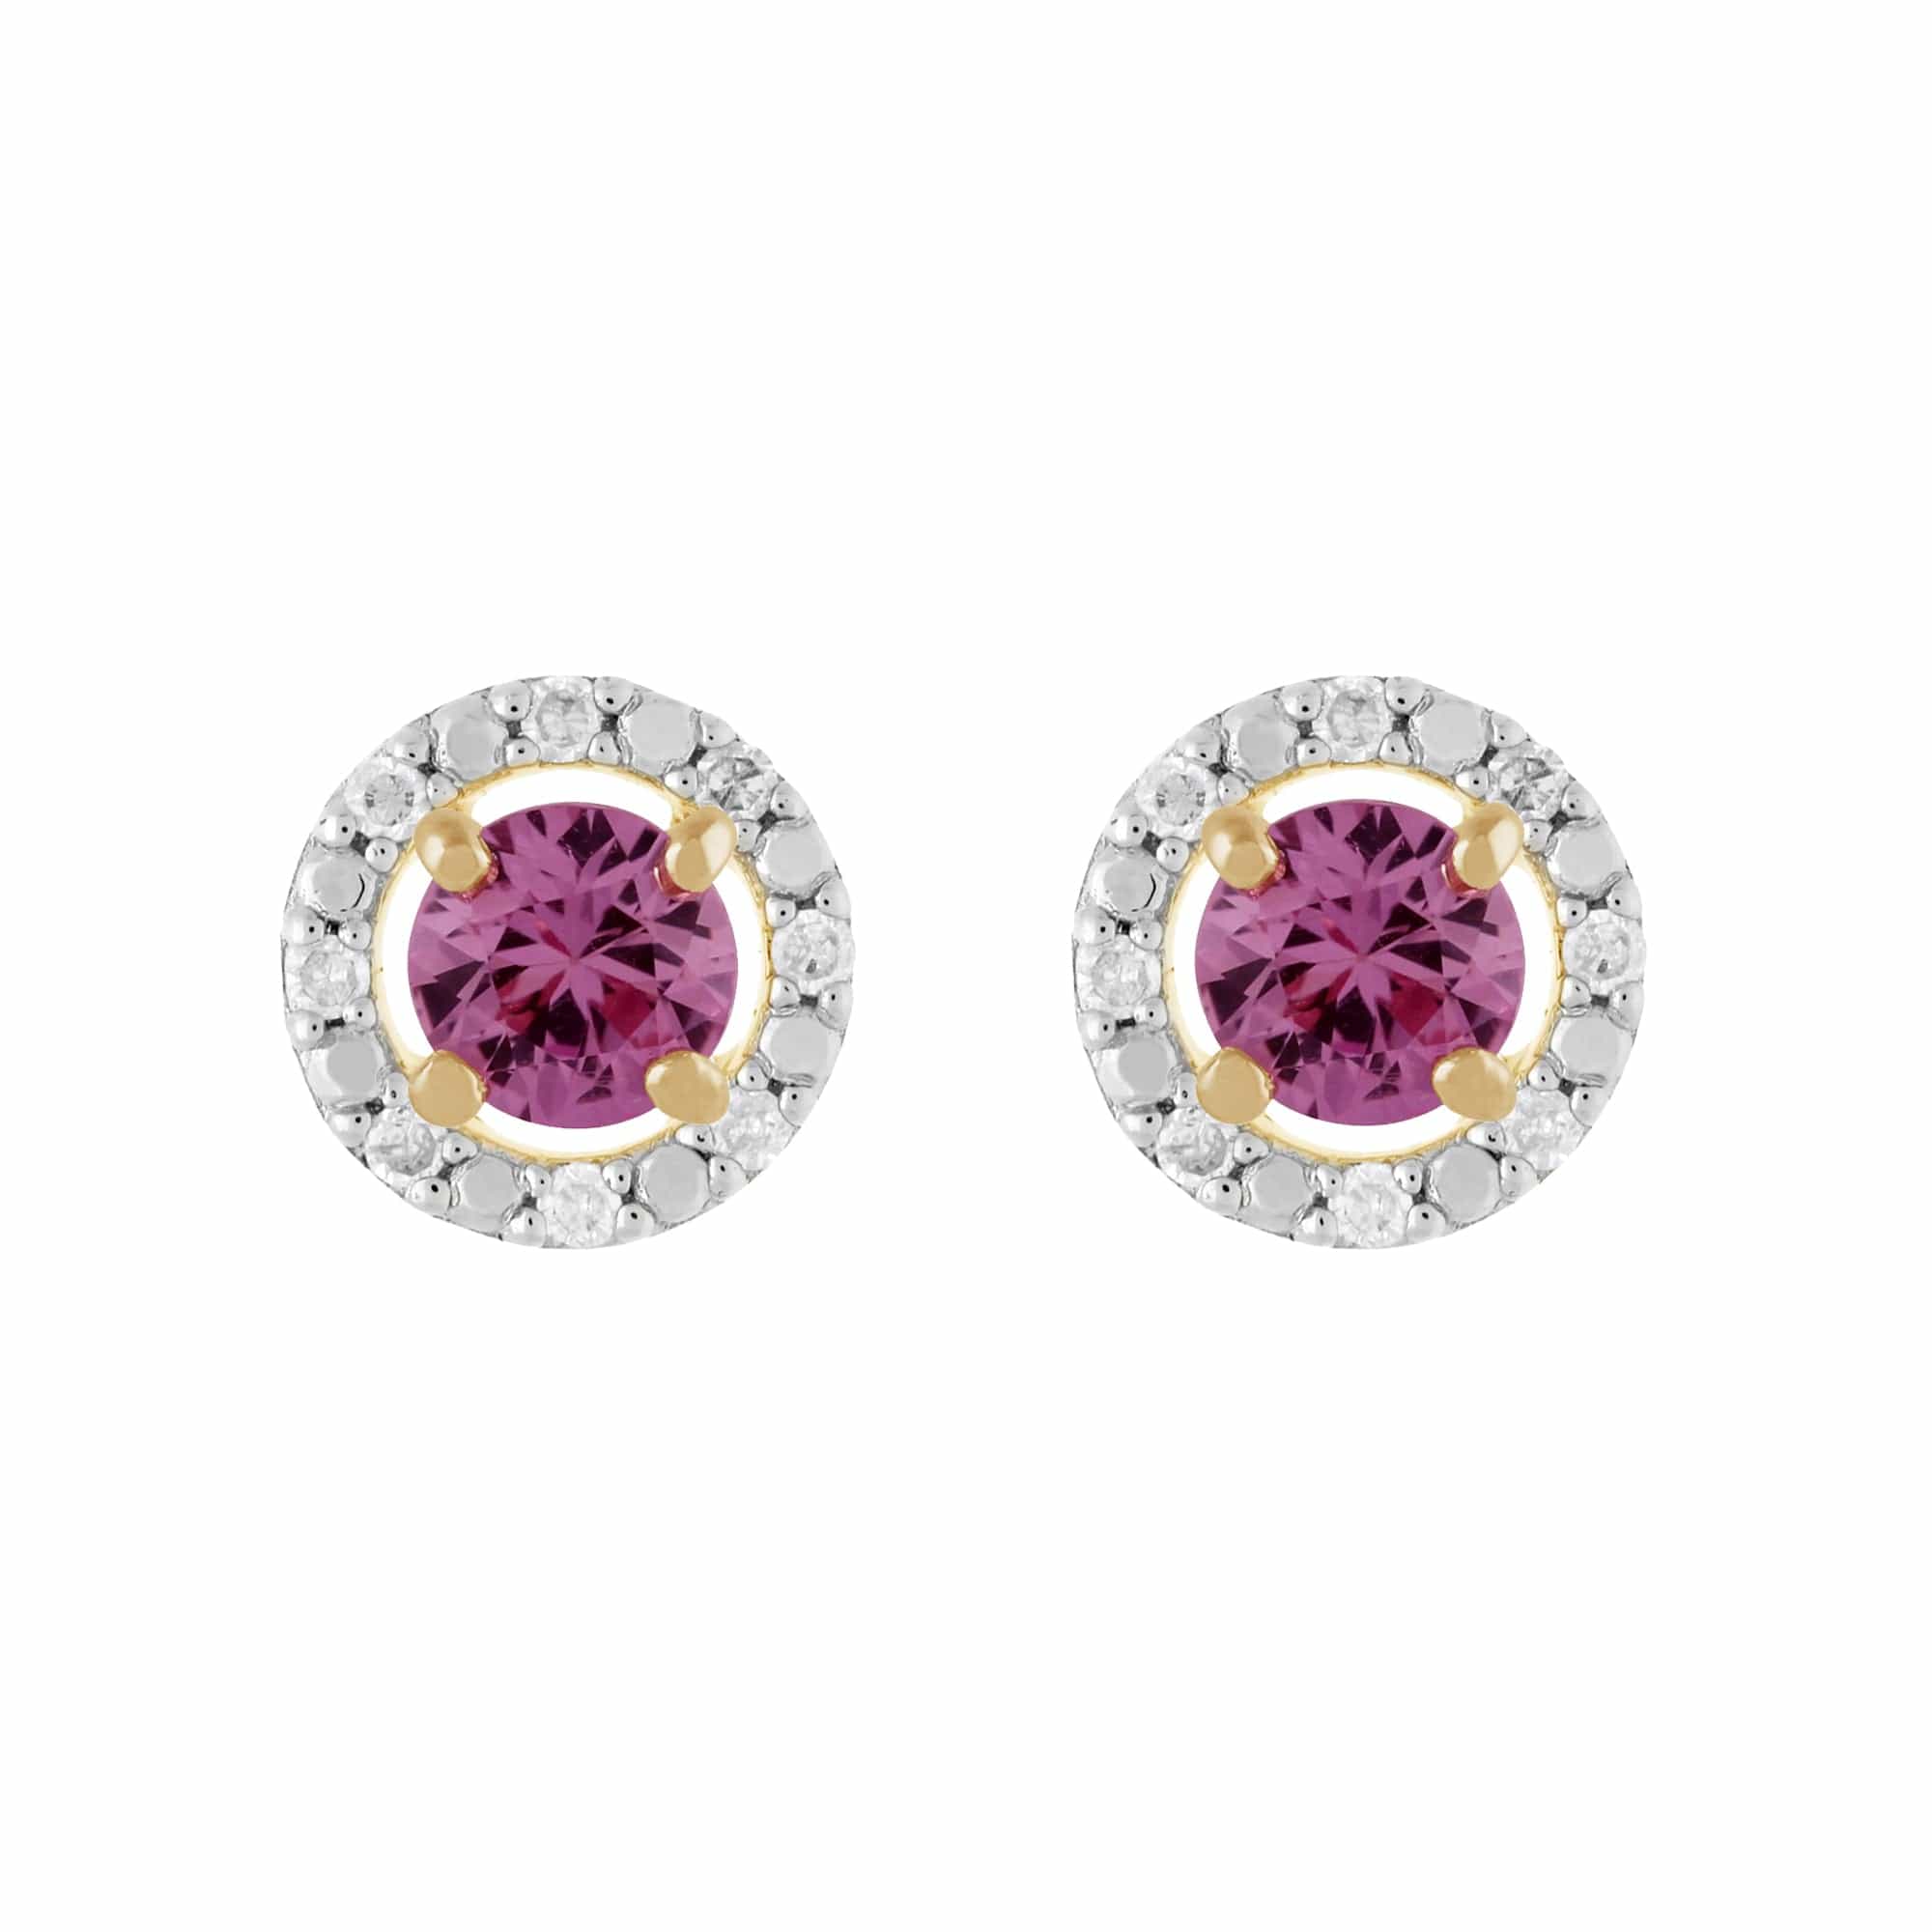 183E0083259-191E0376019 Classic Round Pink Sapphire Stud Earrings with Detachable Diamond Round Earrings Jacket Set in 9ct Yellow Gold 1